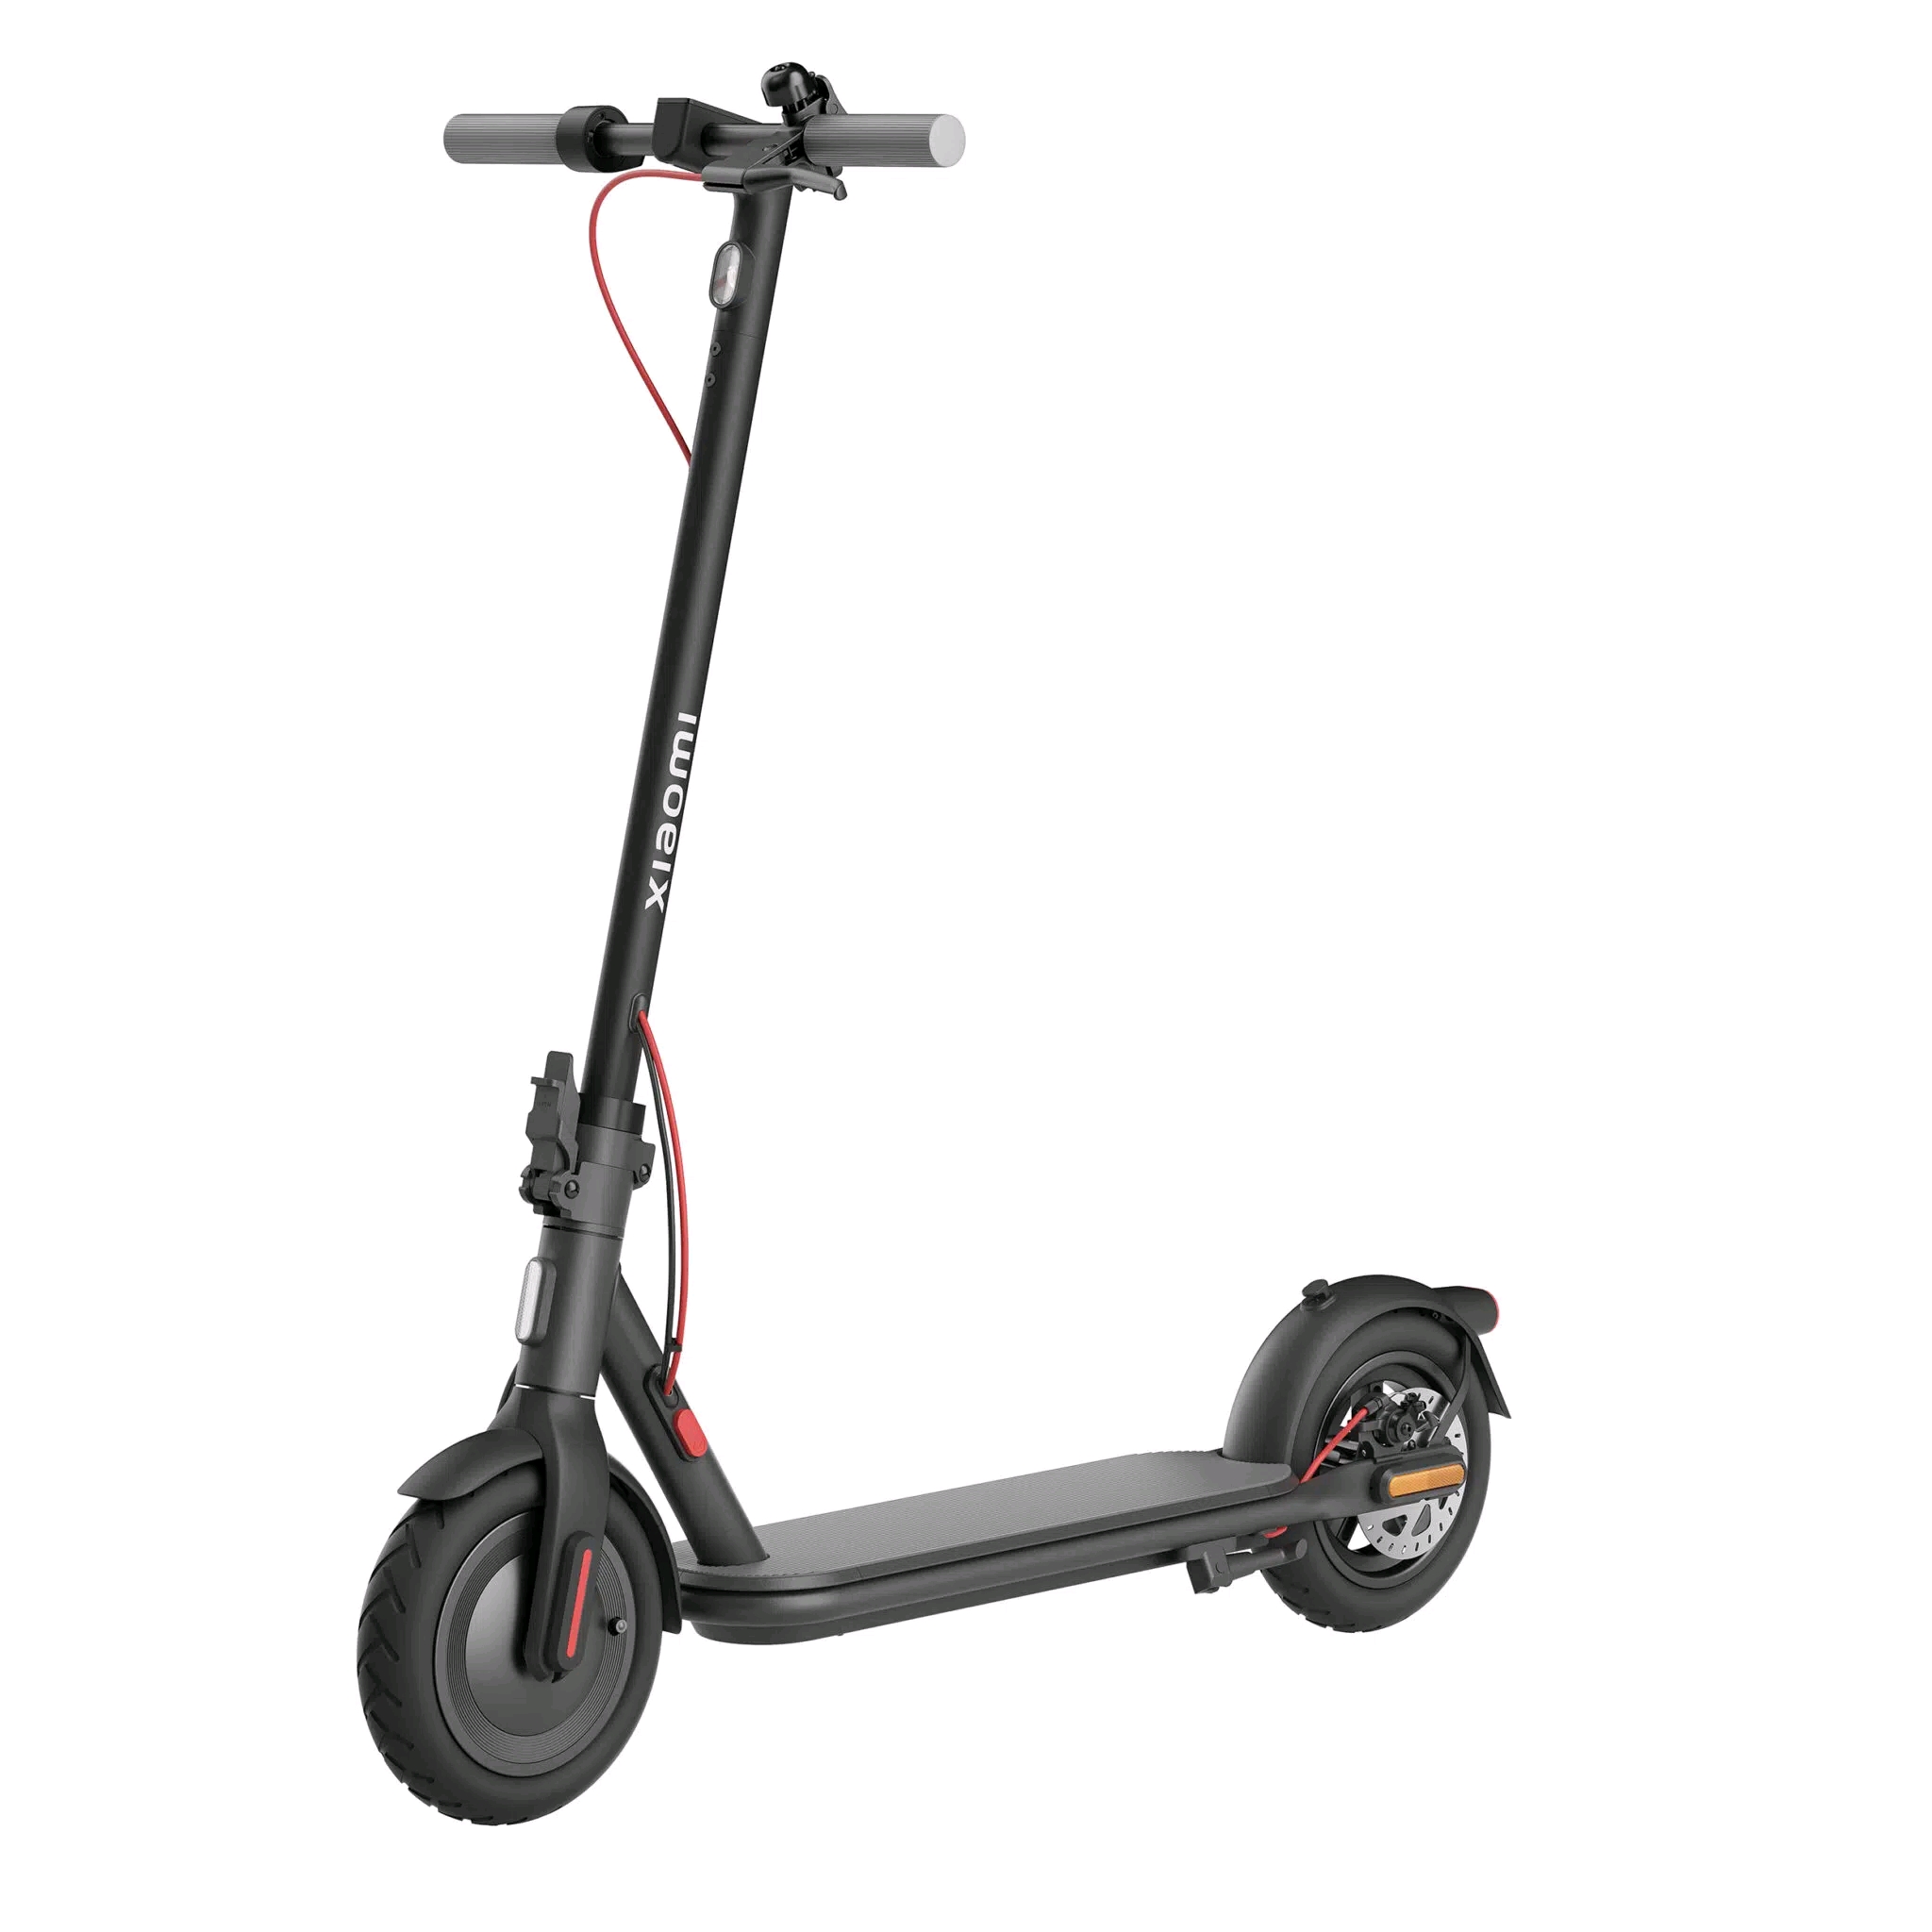 Xiaomi Electric Scooter 4 Электросамокат